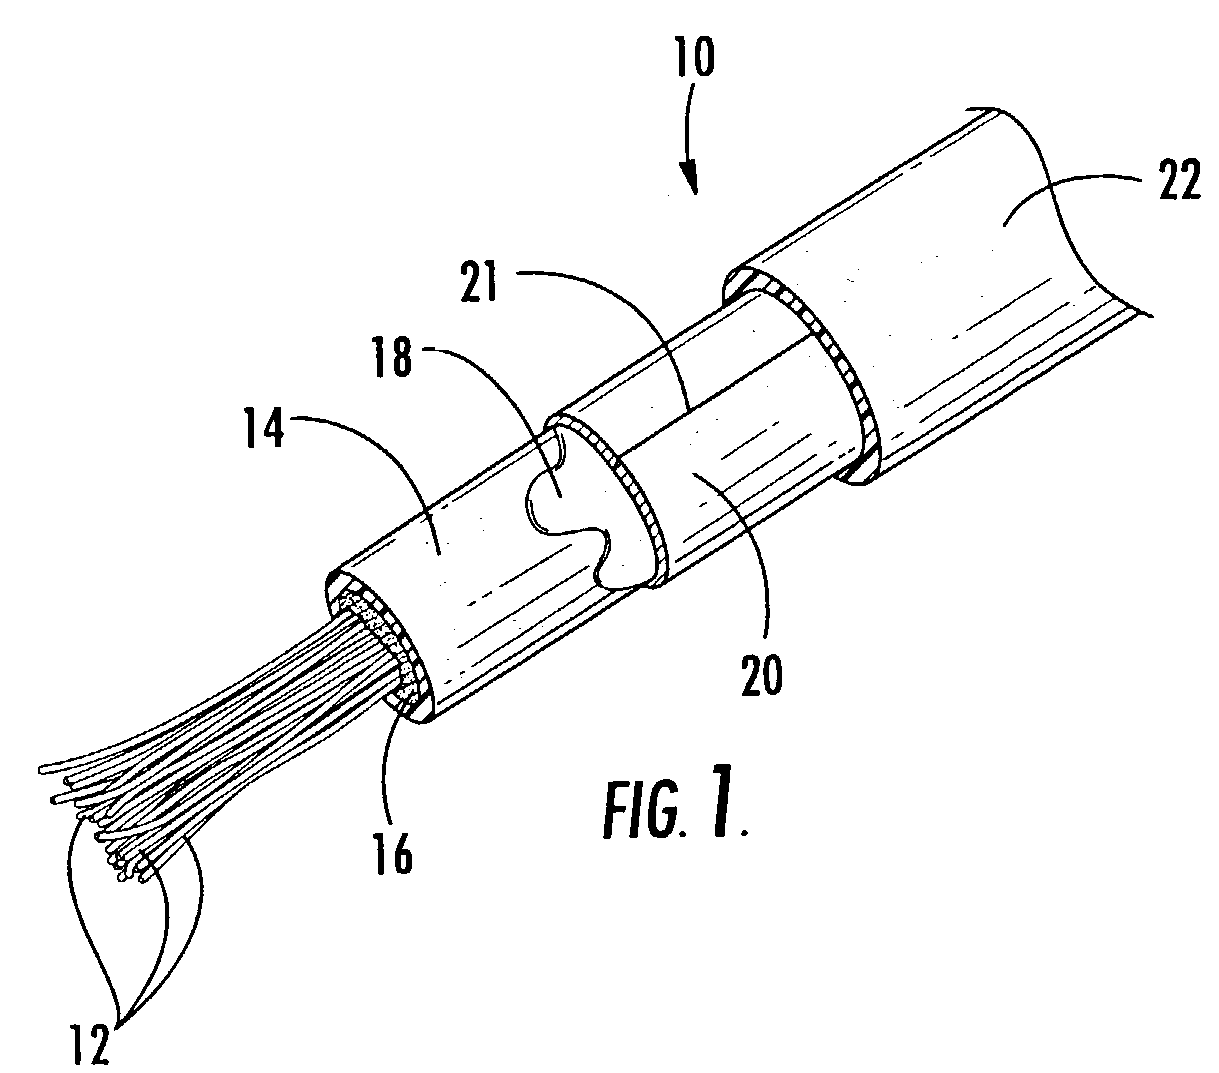 Fiber optic cable with composite polymeric/metallic armor